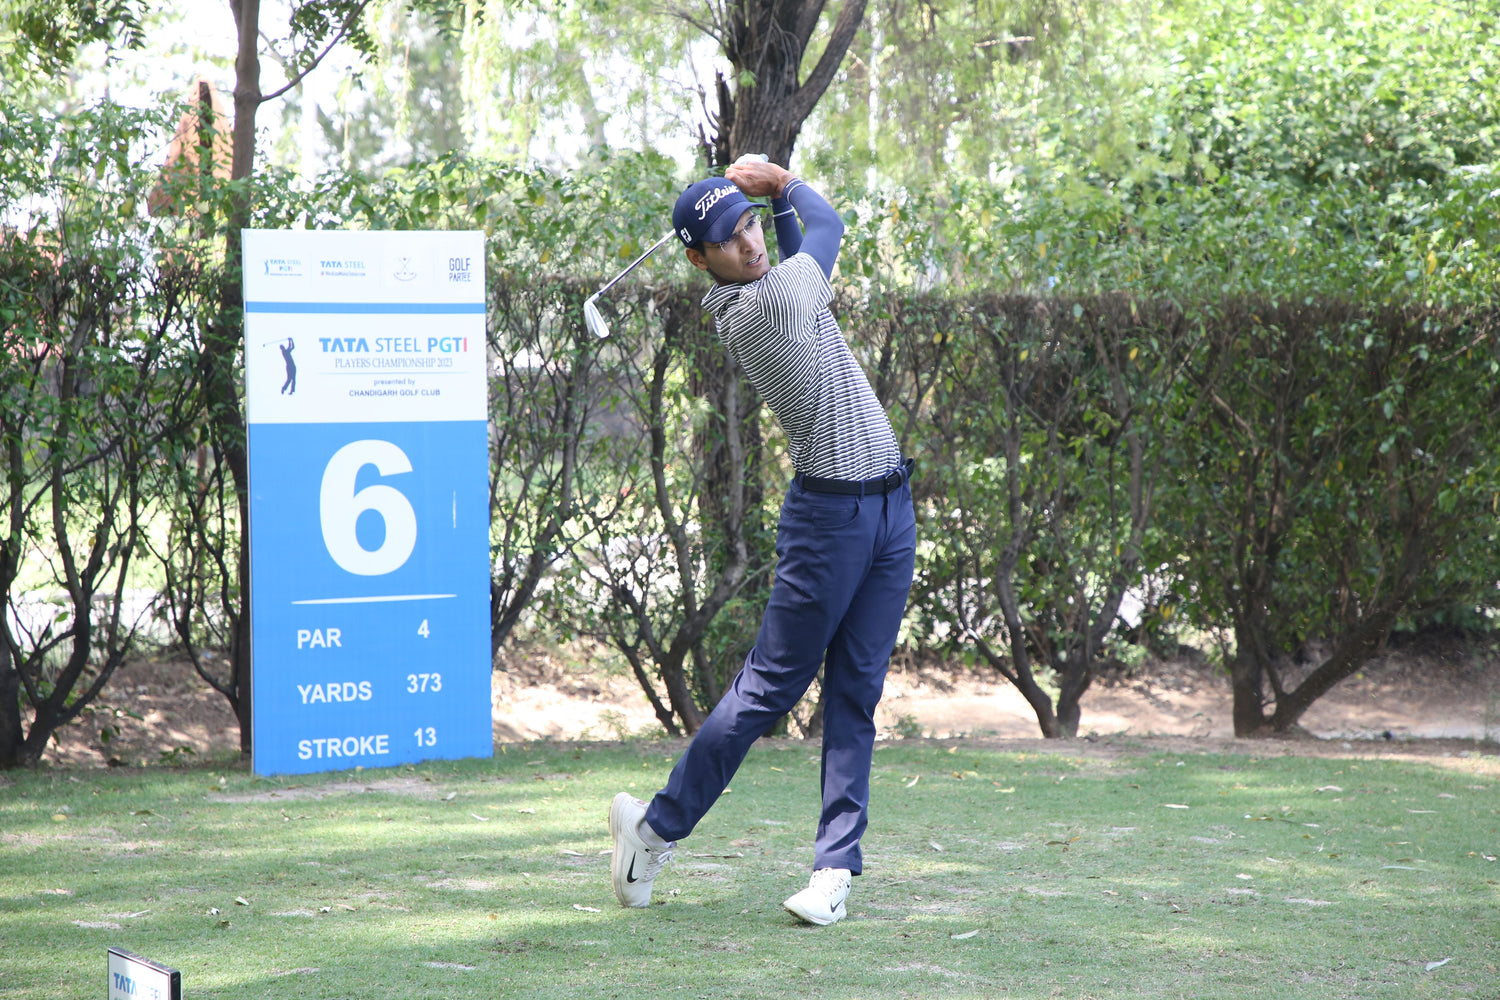 In-form Karan Pratap Singh prevails in tight finish for maiden victory, moves into third place in TATA Steel PGTI Rankings